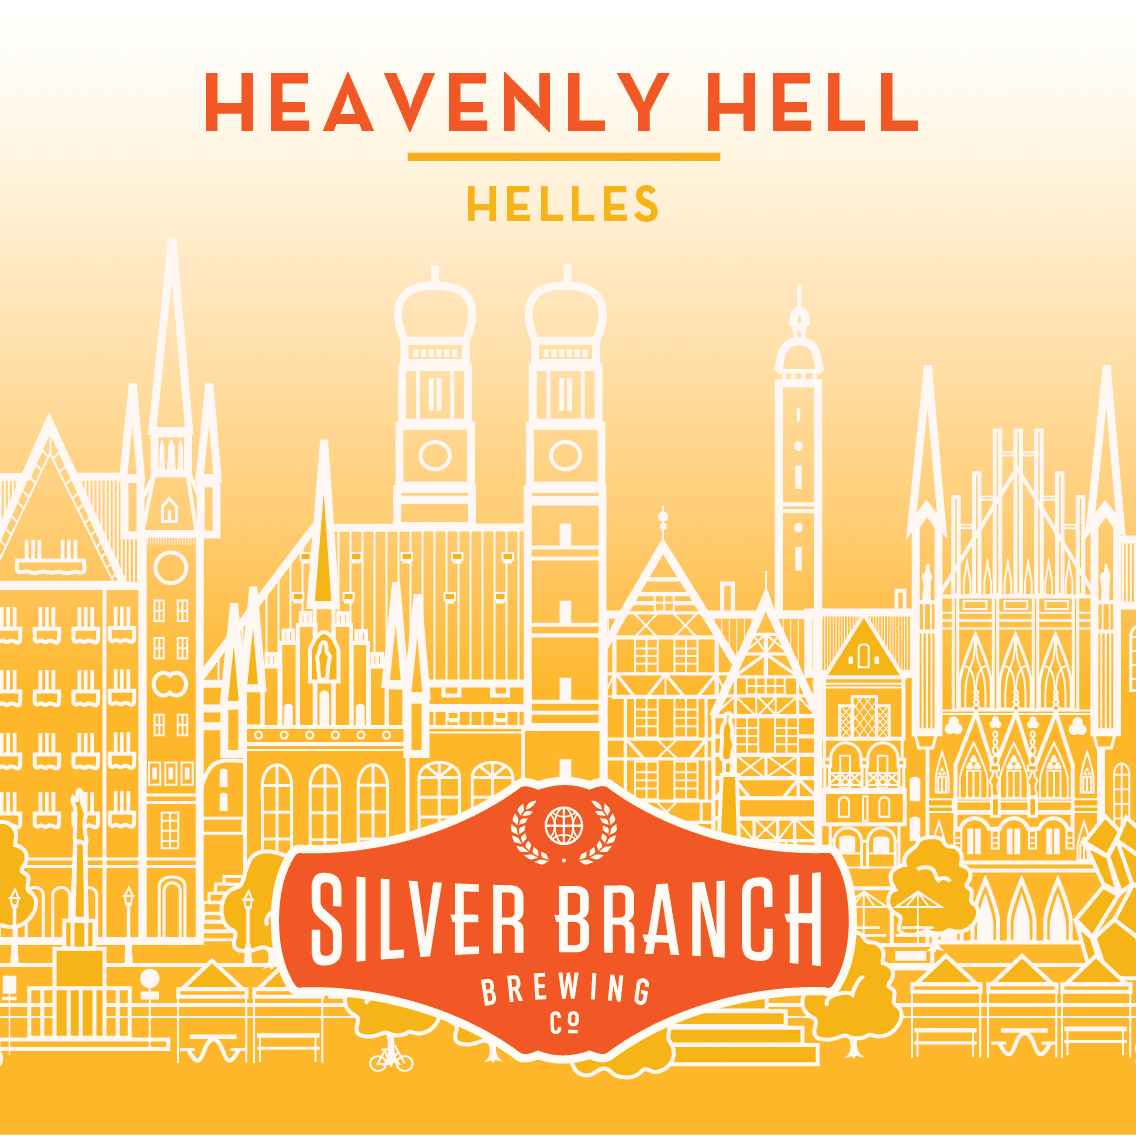 Silver Branch Brewing Heavenly Hell